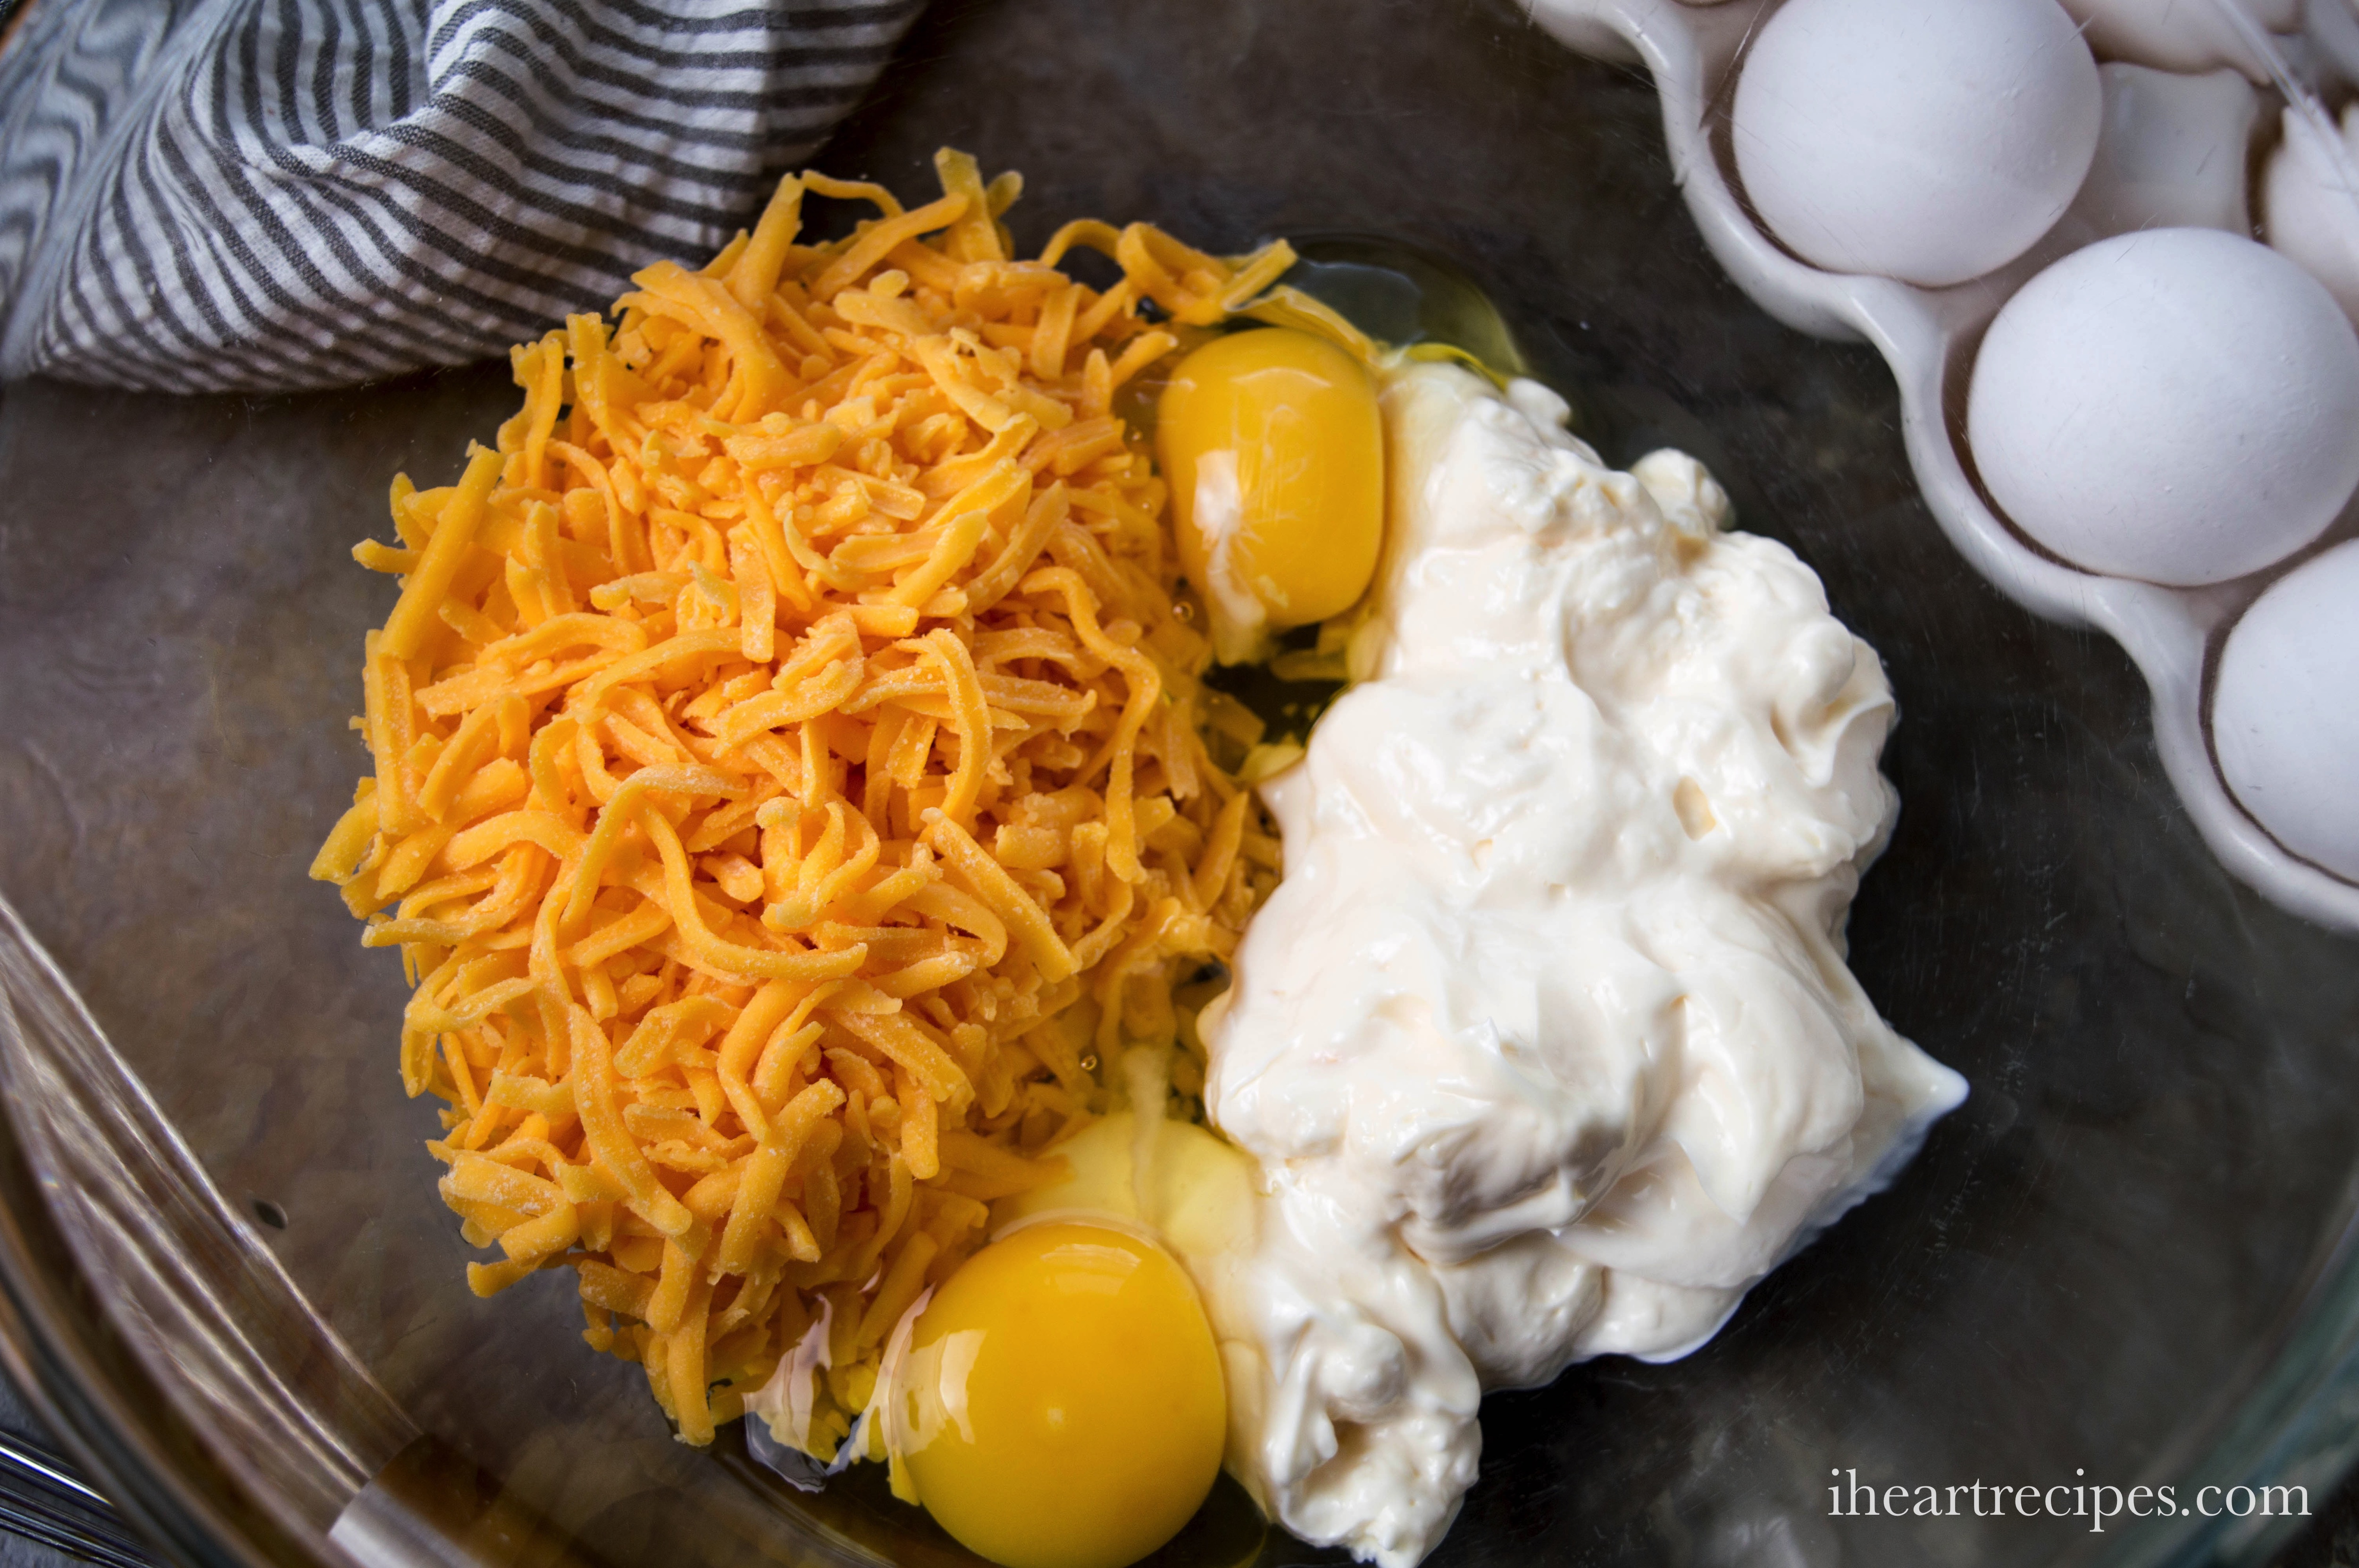 Cheddar cheese, eggs and creamy mayo in a glass mixing bowl. Get ready for the creamiest broccoli casserole!